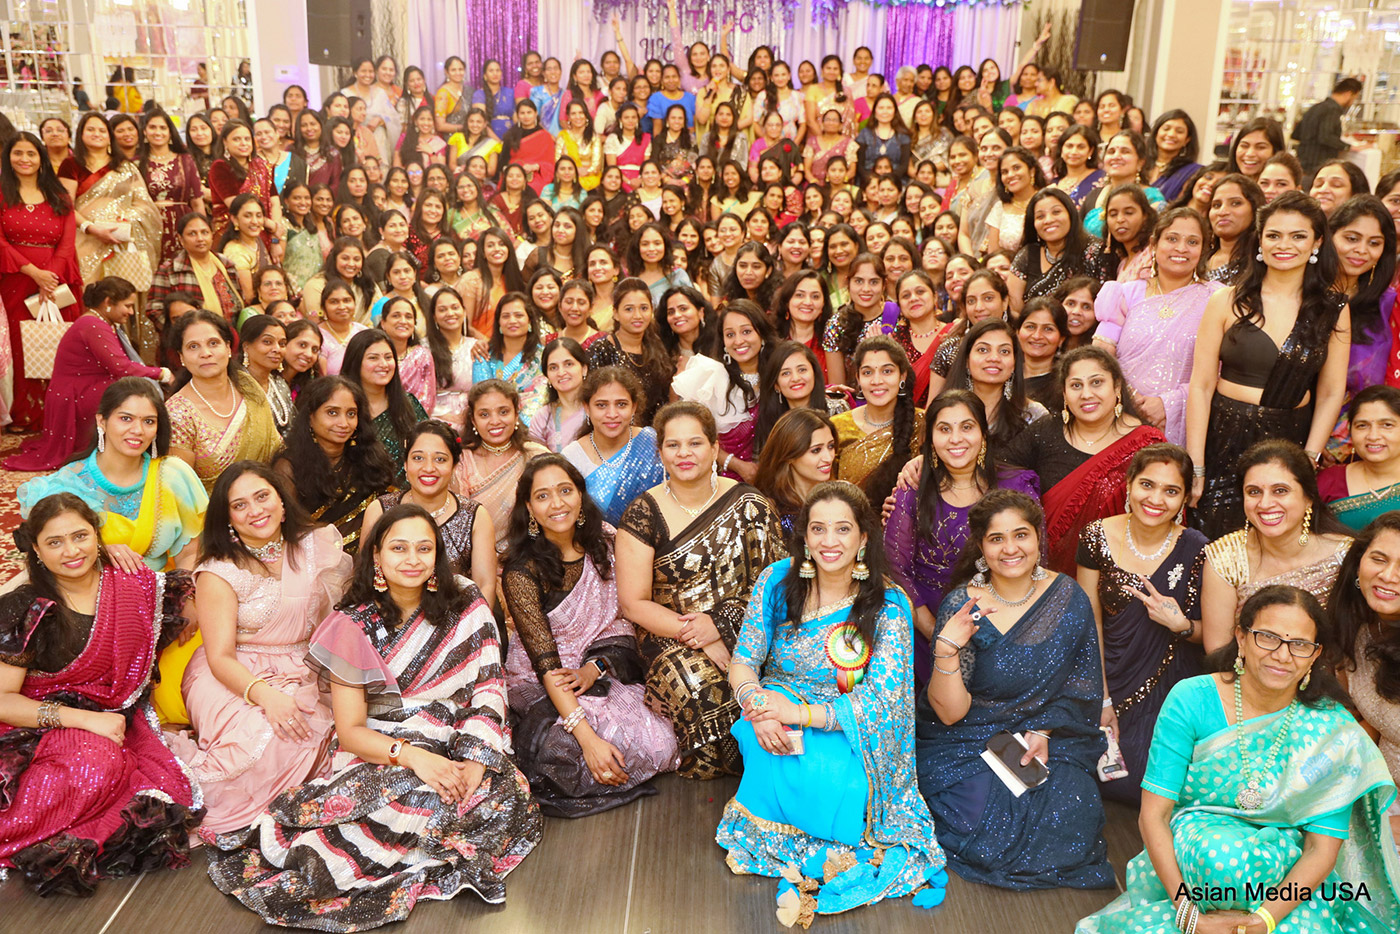 TAGC Celebrated International Women’s day Event as